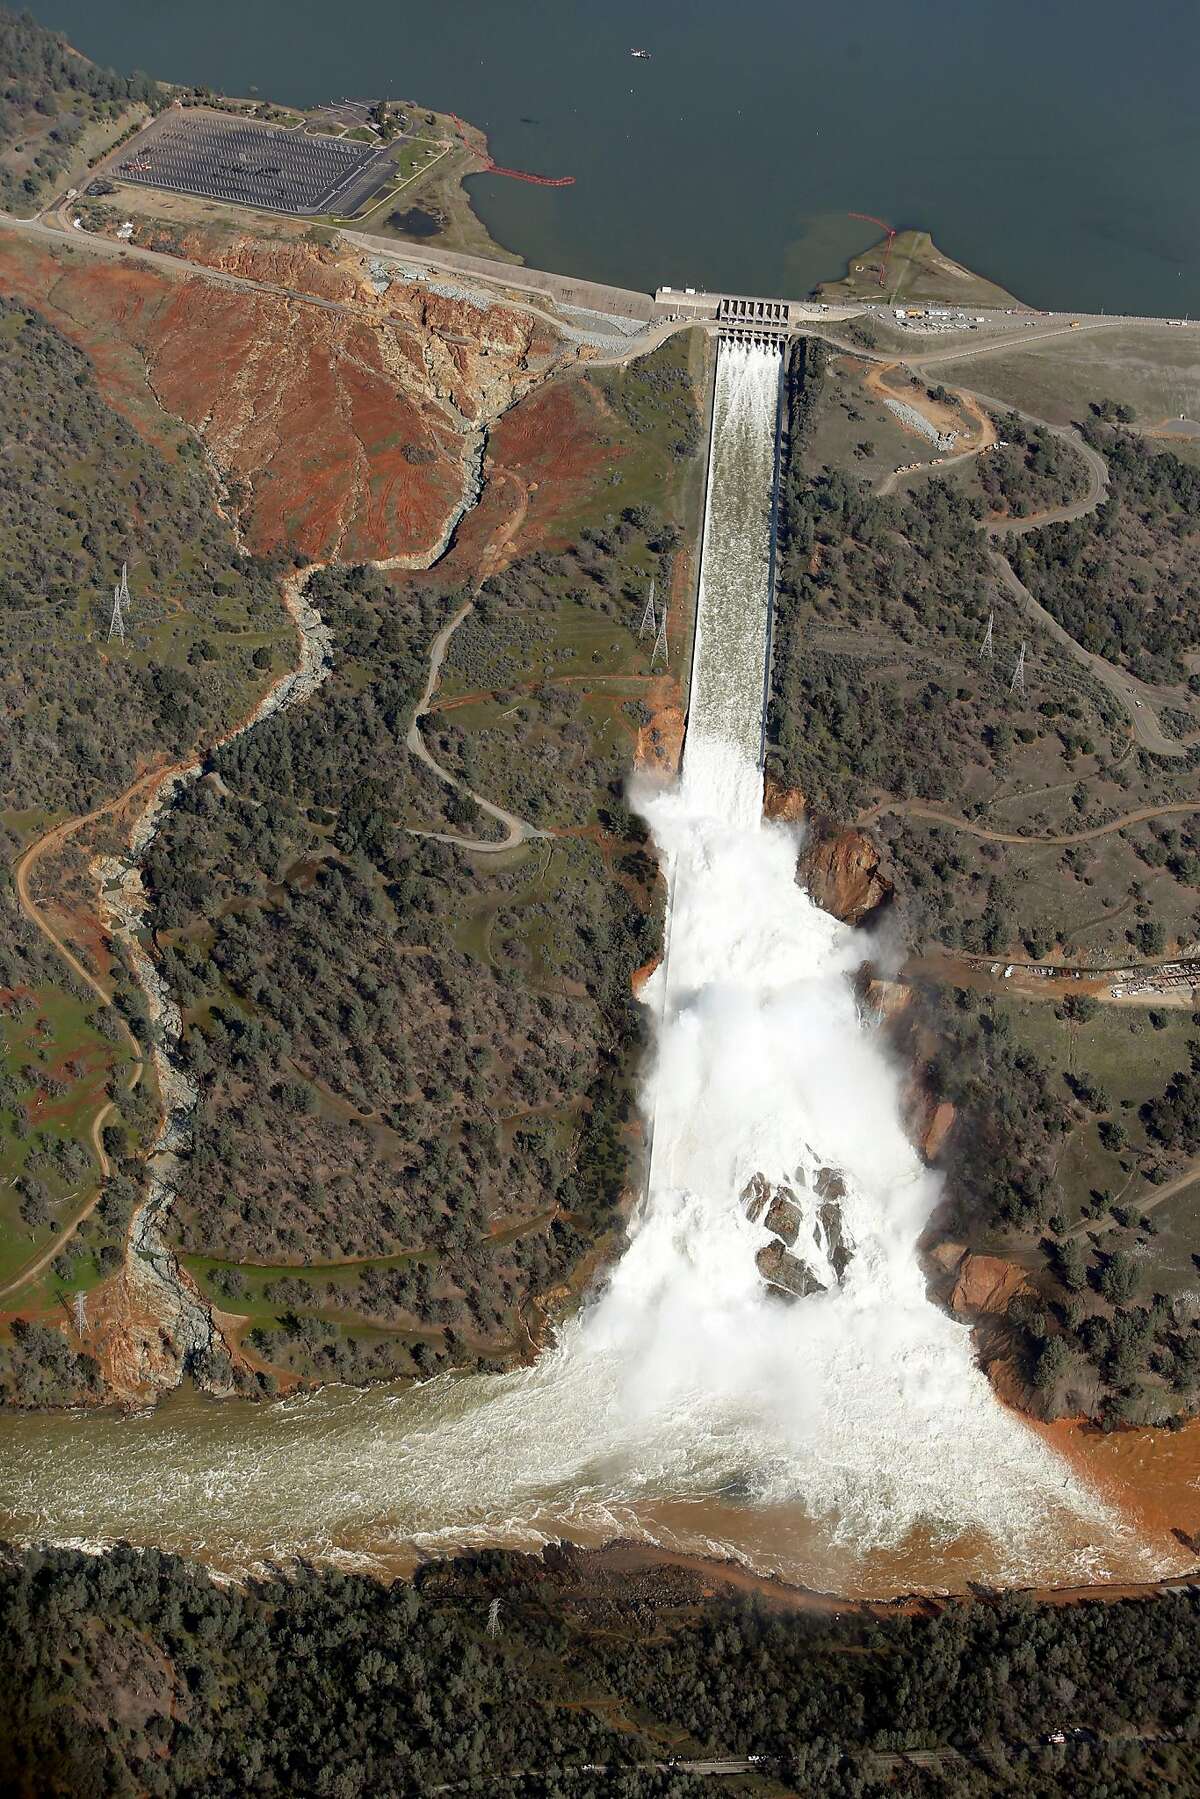 Water flows out of the damaged spillway at Oroville Dam in Oroville, Calif., on Tuesday, February 14, 2017. State water officials say they've met their Nov. 1 deadline for rebuilding the dam's two damaged spillways, but federal officials are skeptical that the repaired spillways can handle a big flood.